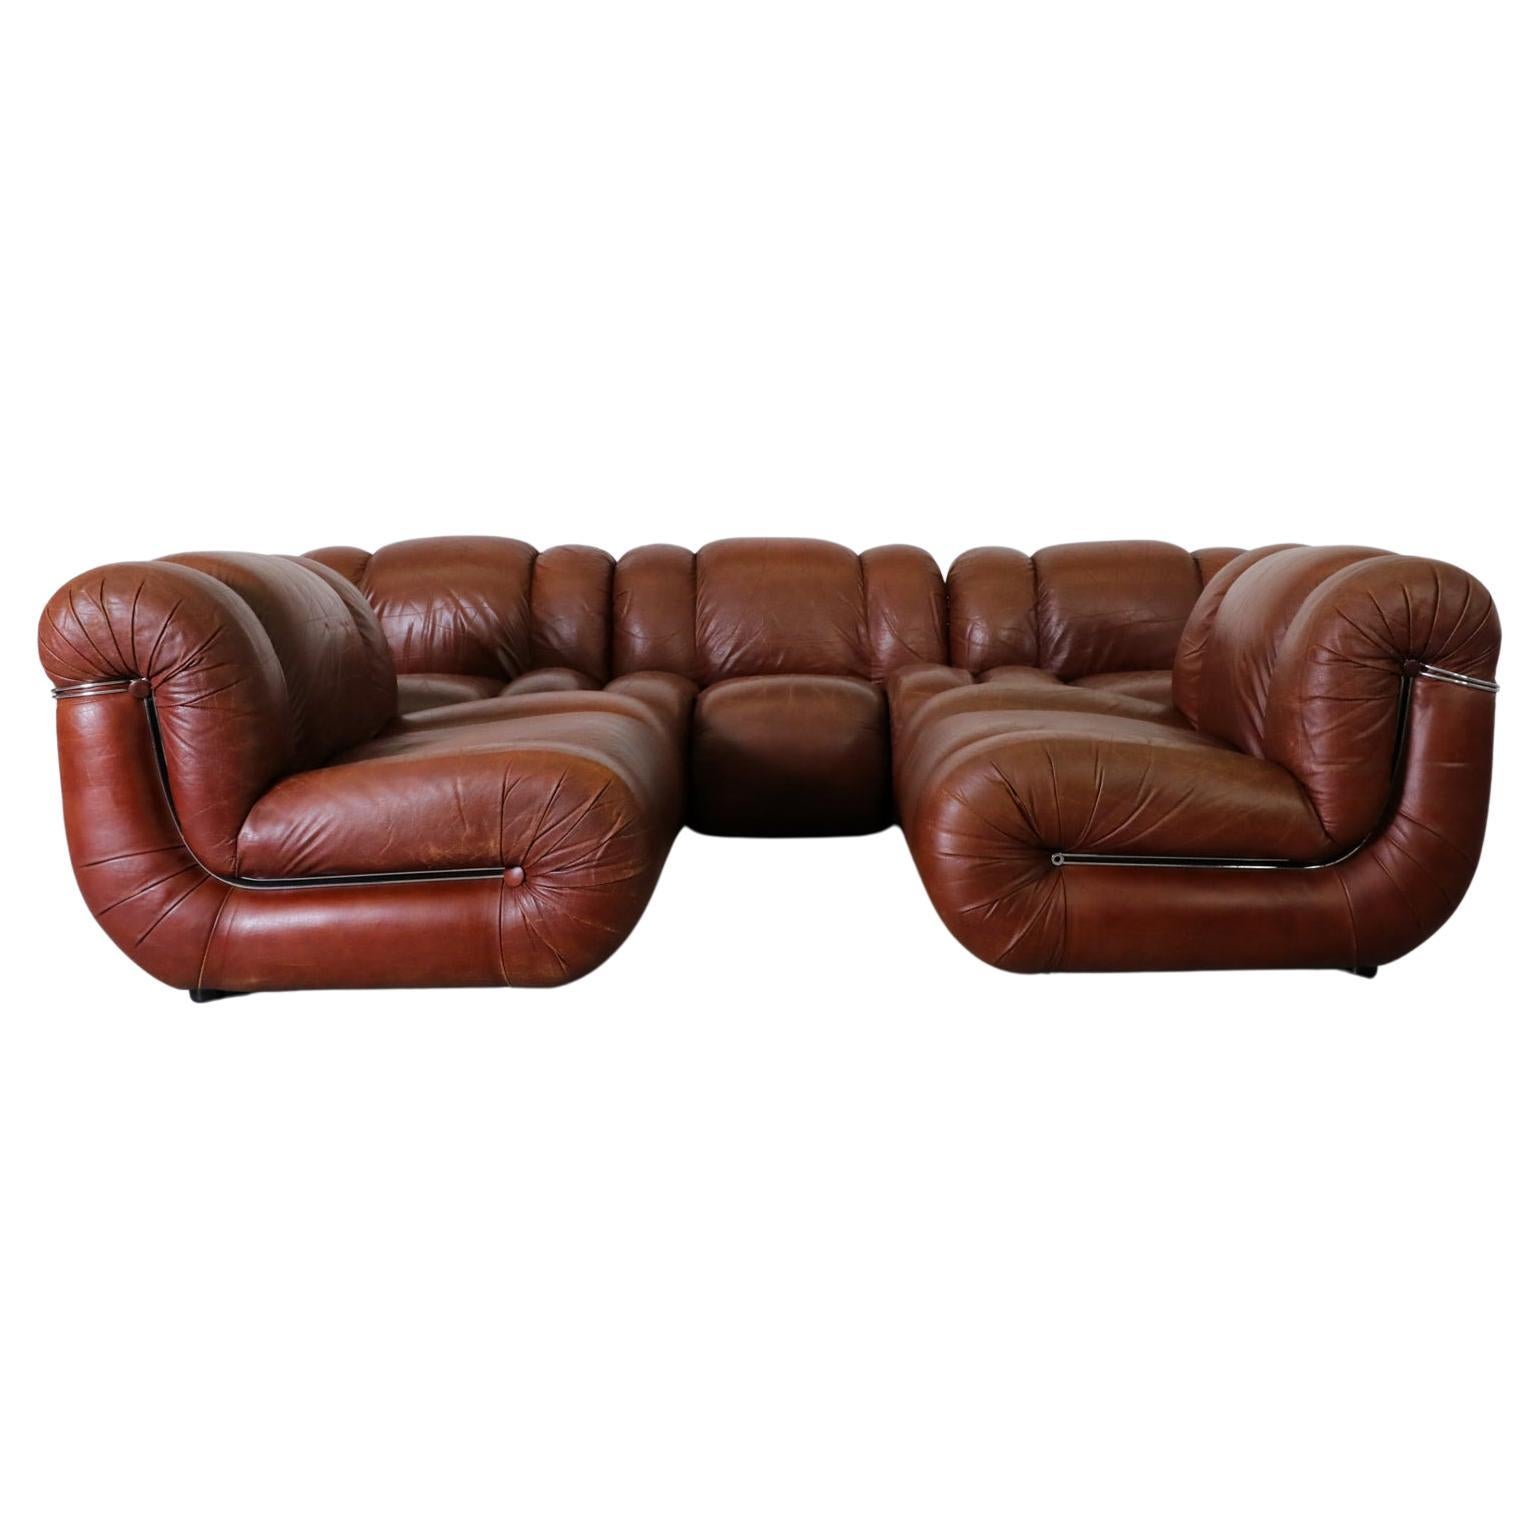 Mimo Padova Velasquez Modular Sofa In Brown Leather And Chrome, Italy 1970s For Sale